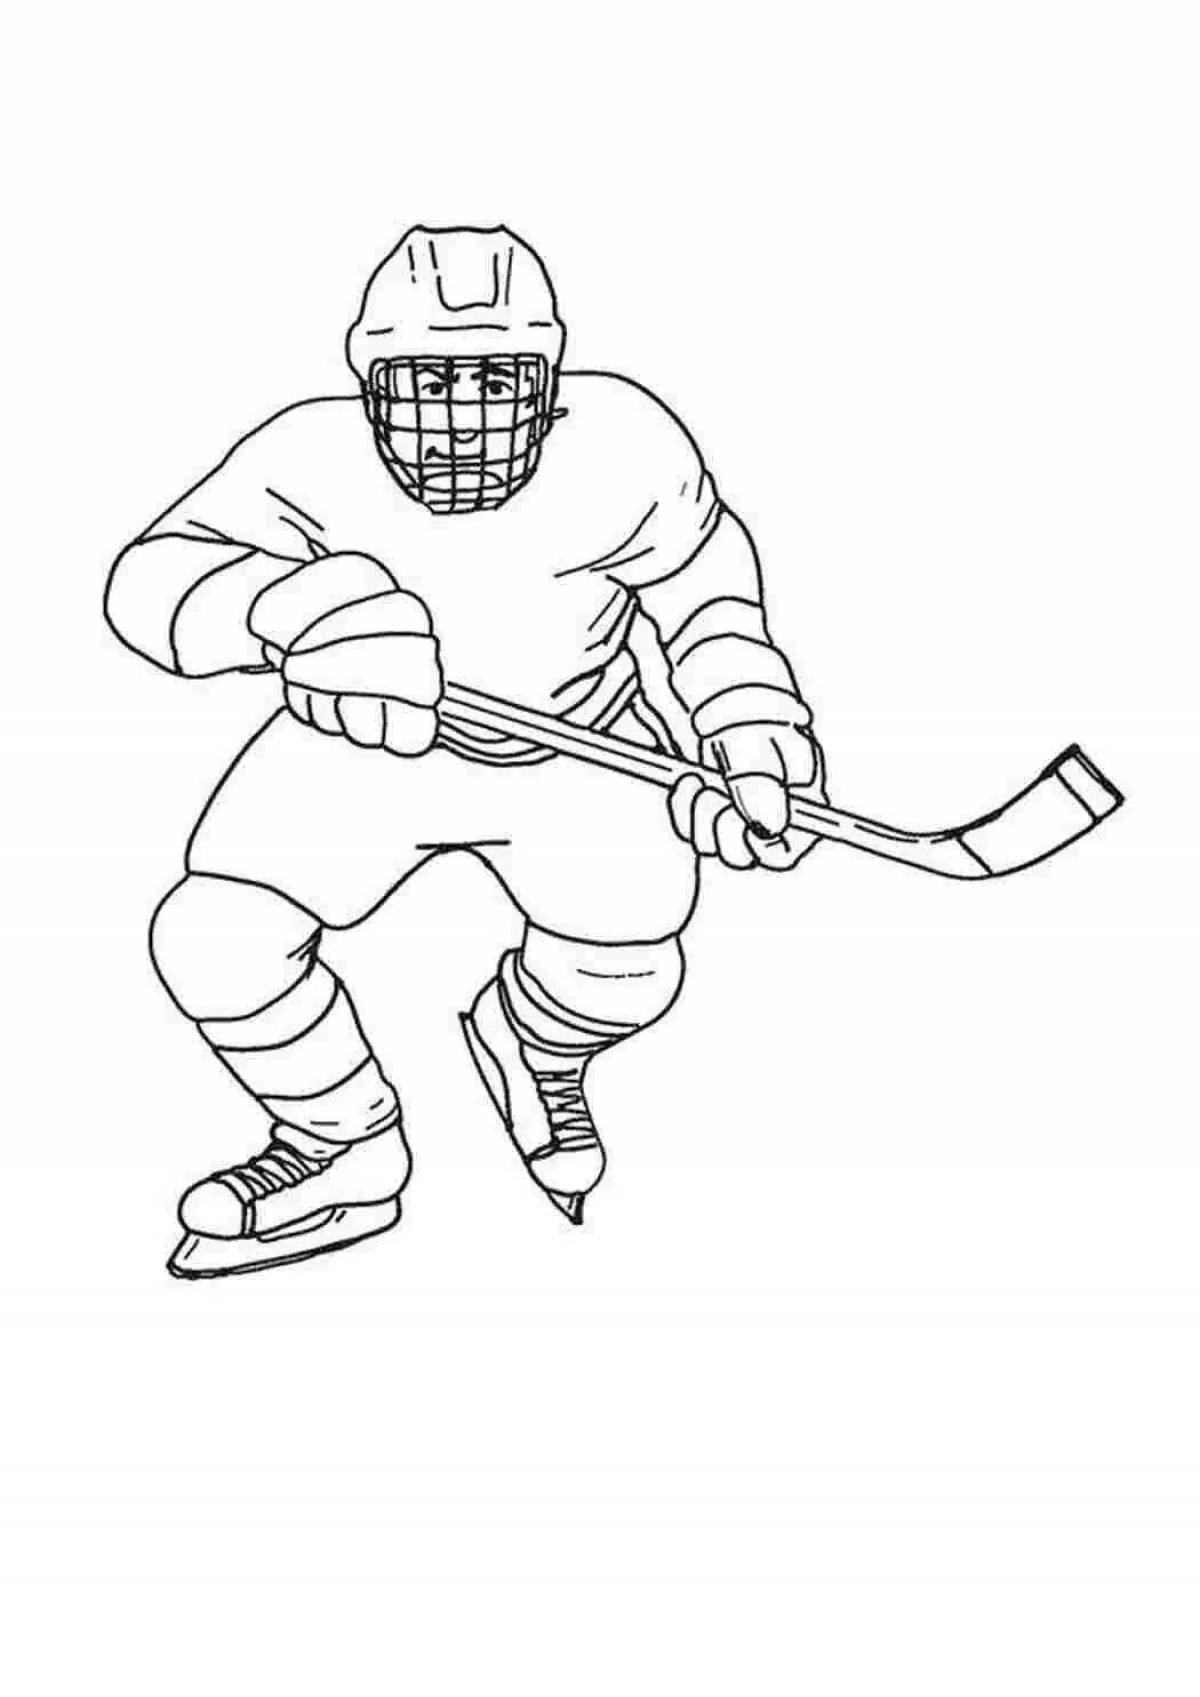 Funny hockey coloring page